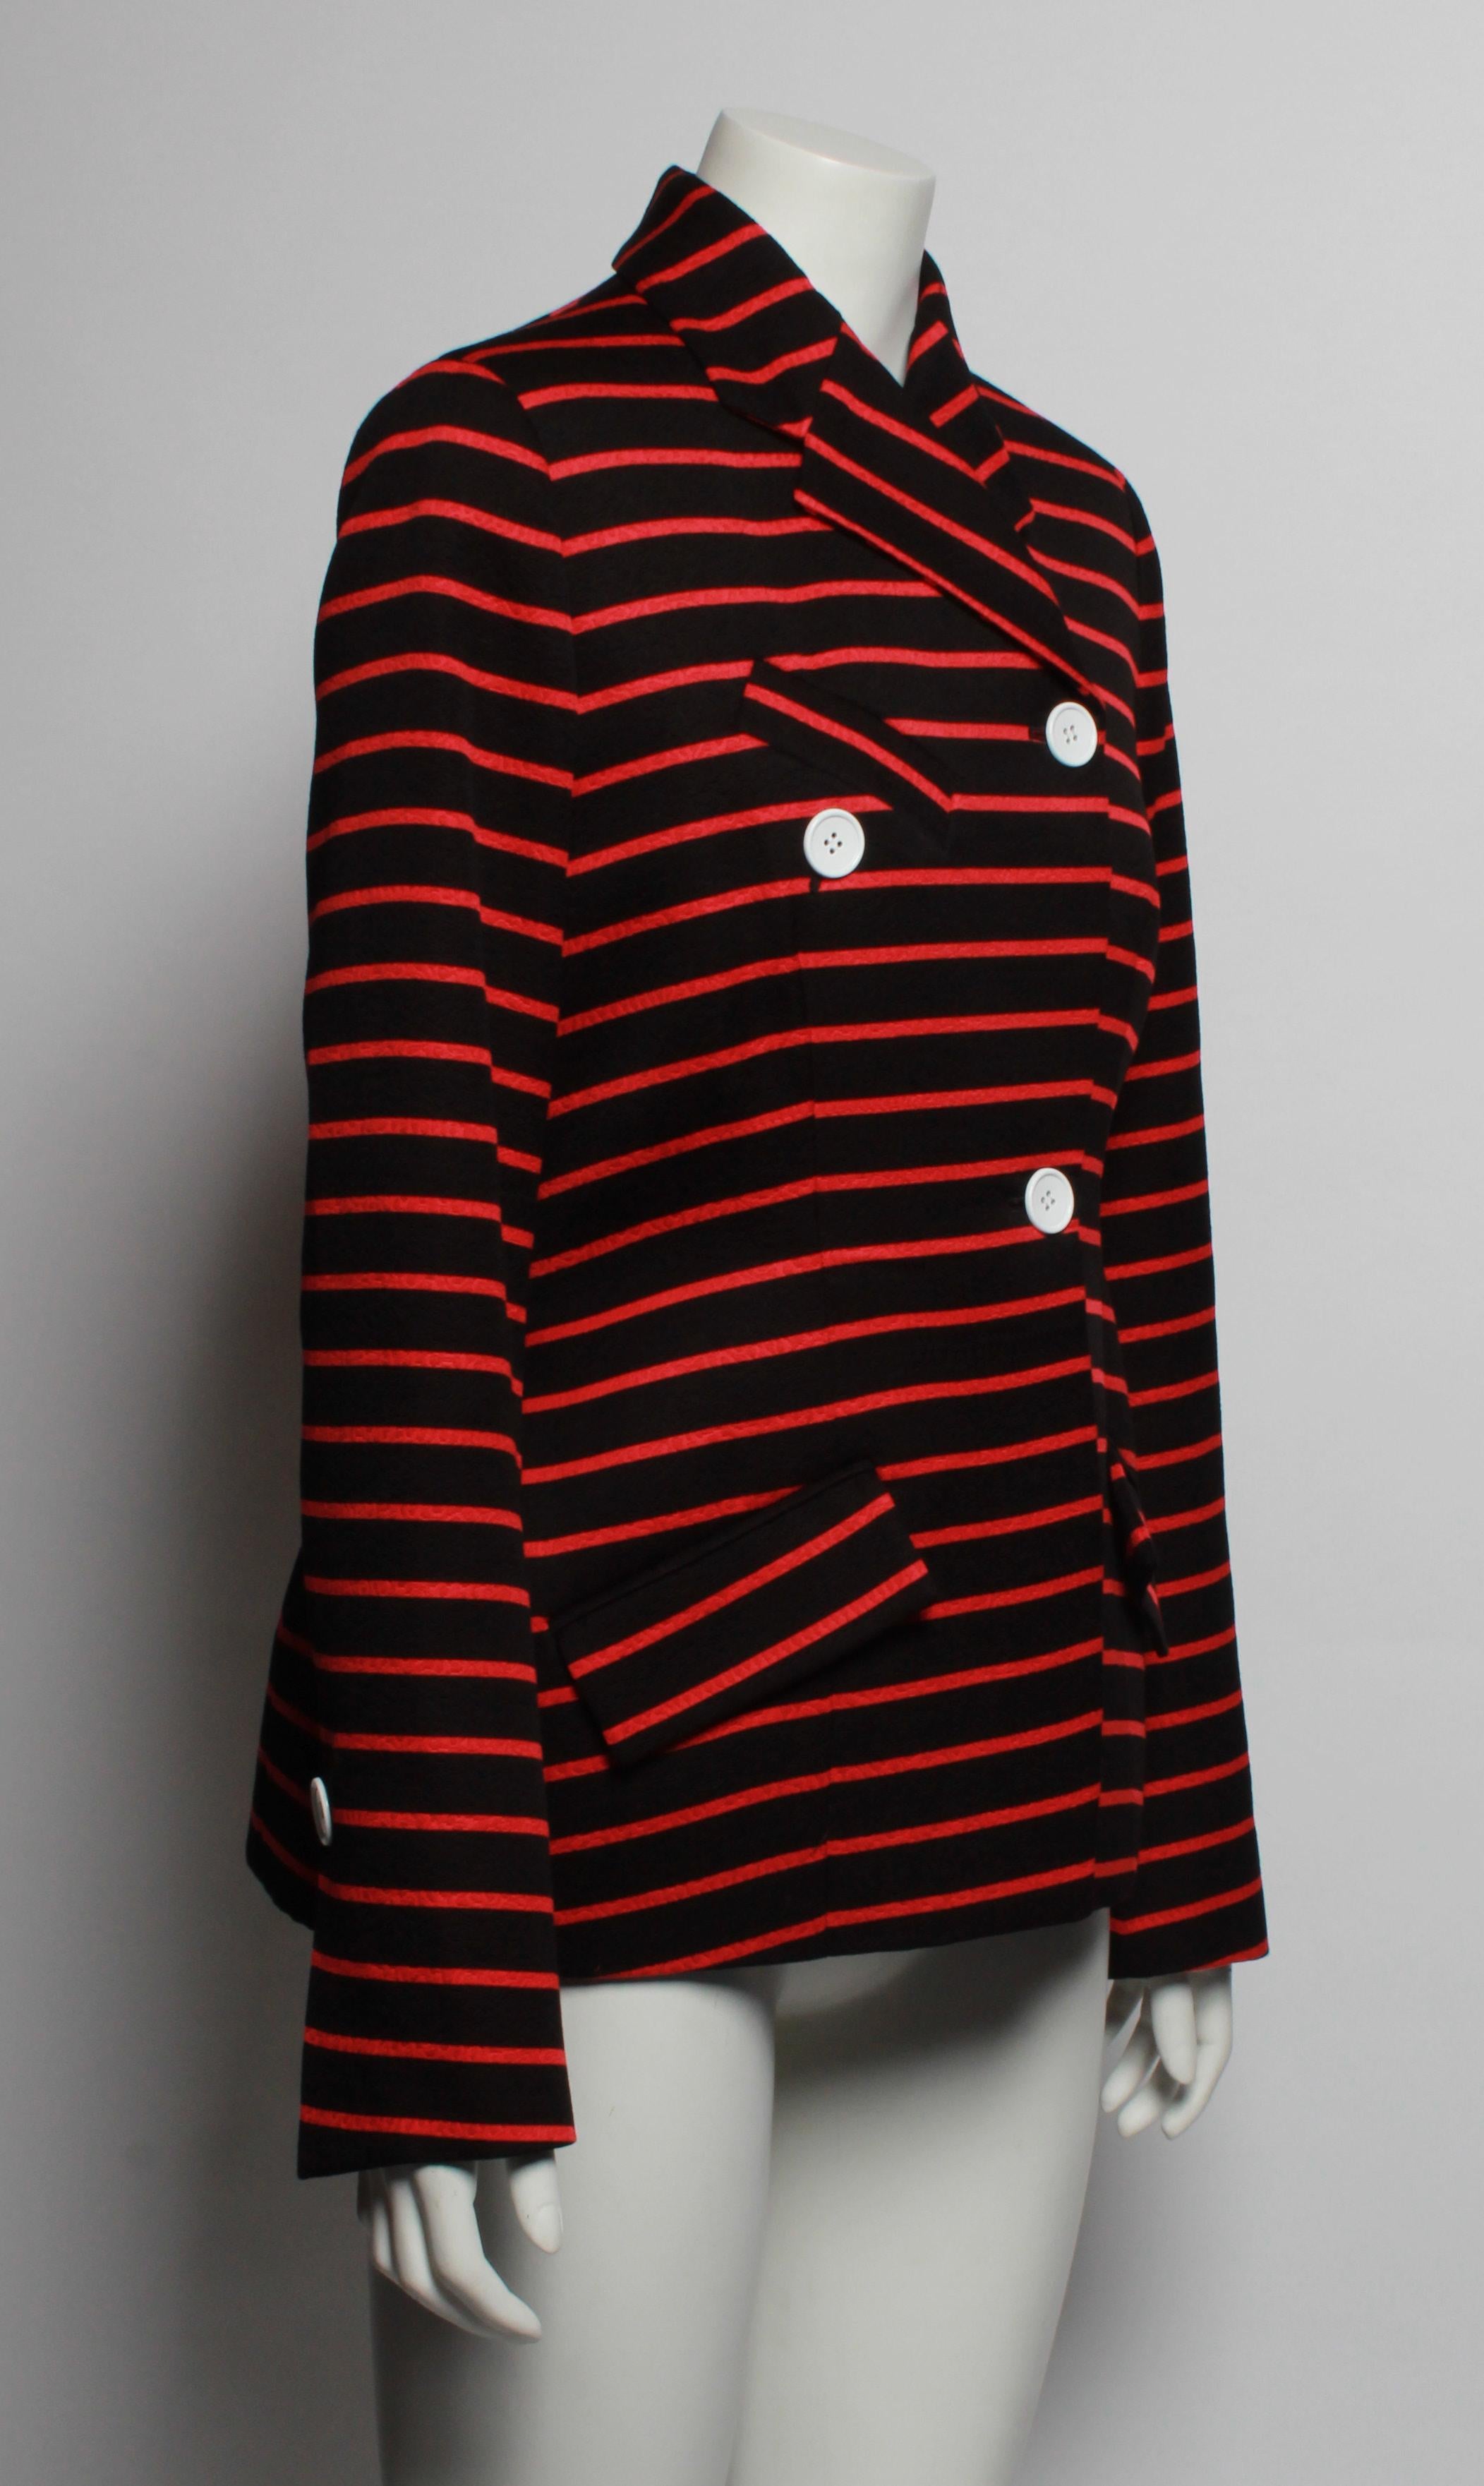  This Proenza Schouler double breasted striped jacket is made of cotton and wool blend jacquard. and features a striking red stripe on a black base.

Add a touch of sophisticated charm to your wardrobe with this  wrap front striped jacket that